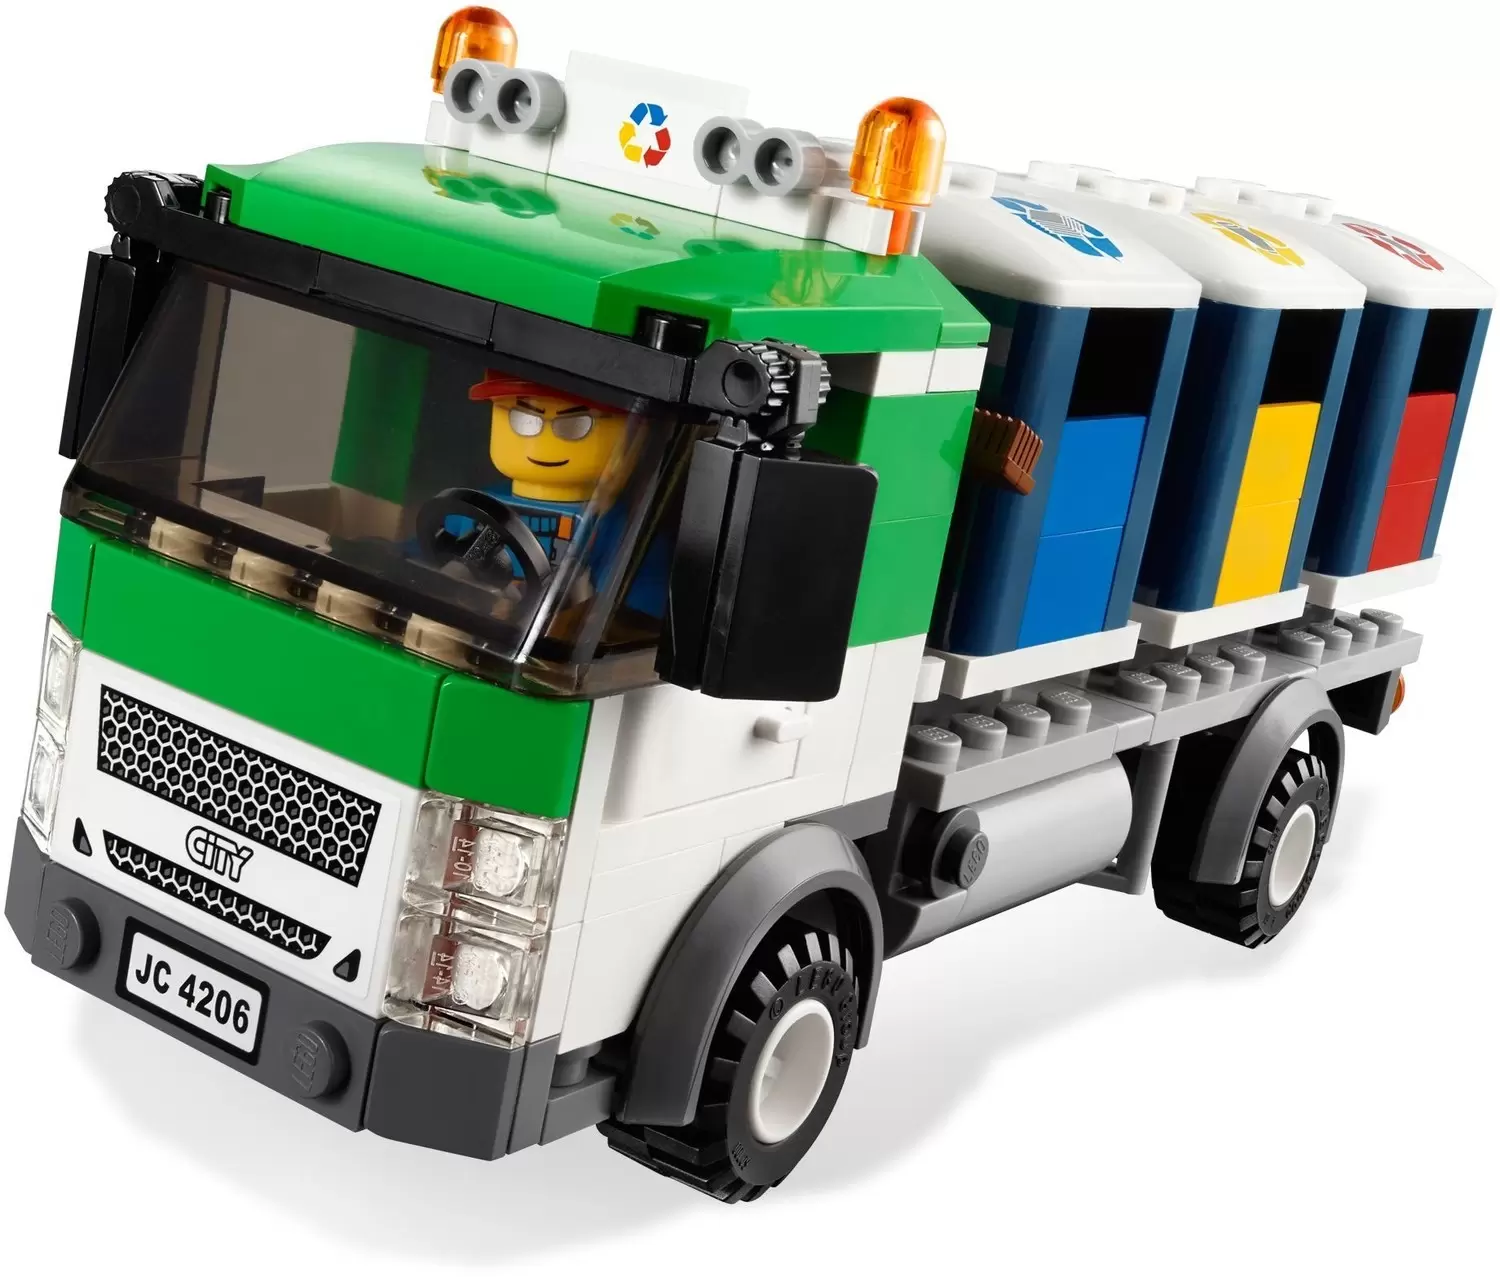 LEGO CITY - Recycling Truck